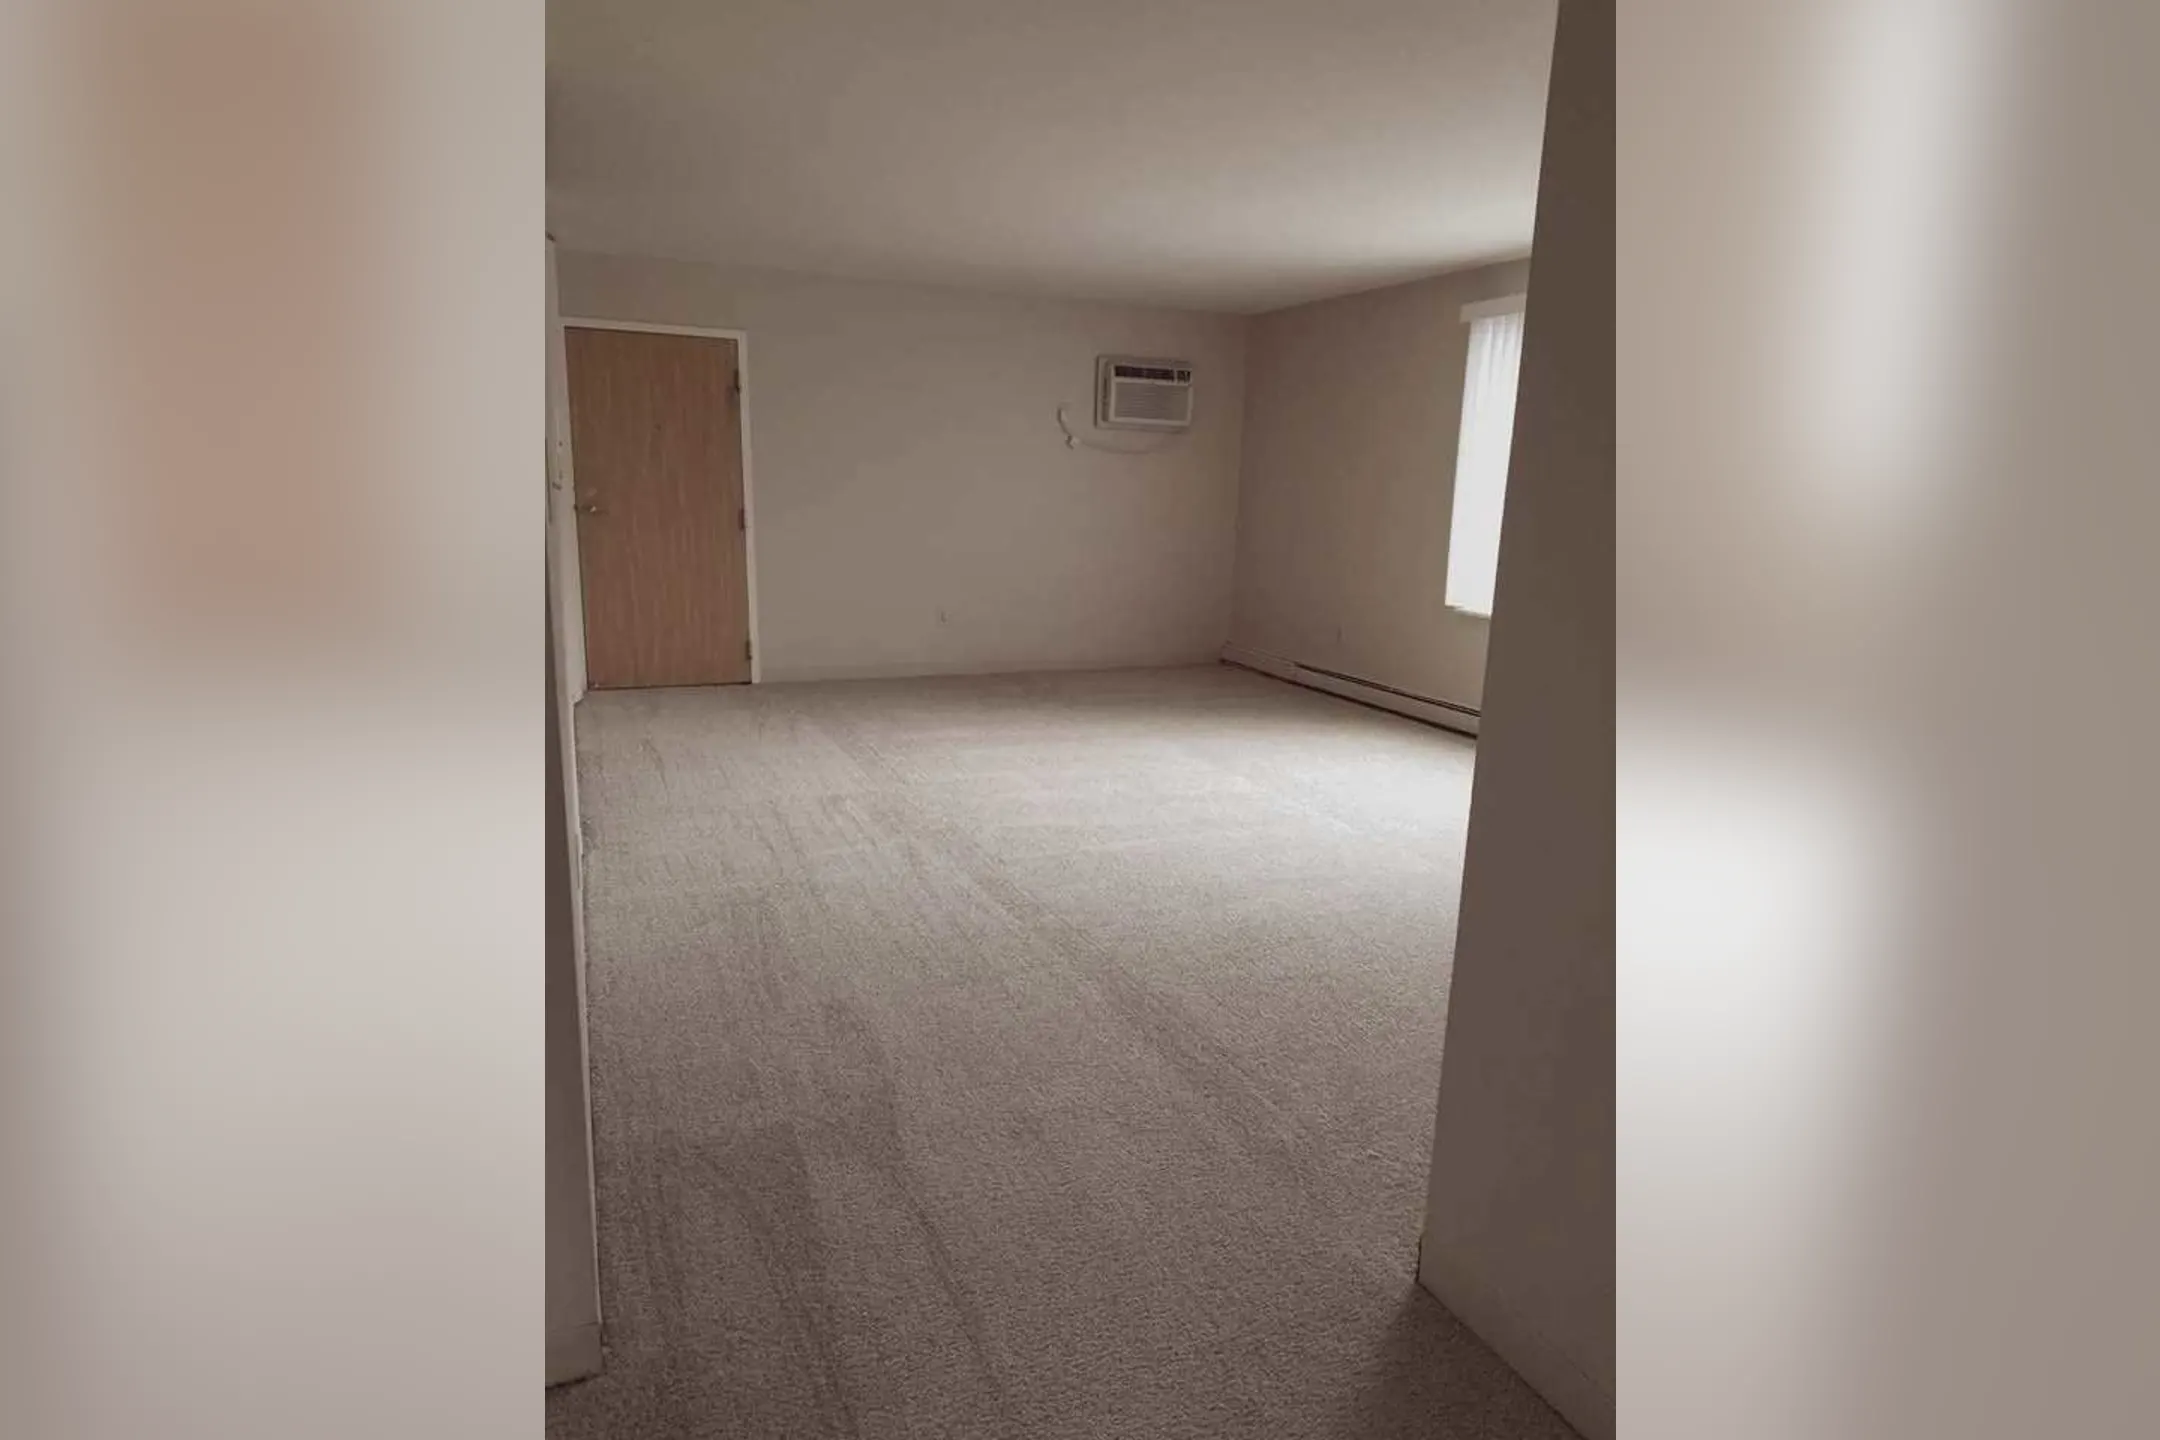 Living Room - Greenbrook Apartments - Greenfield, WI